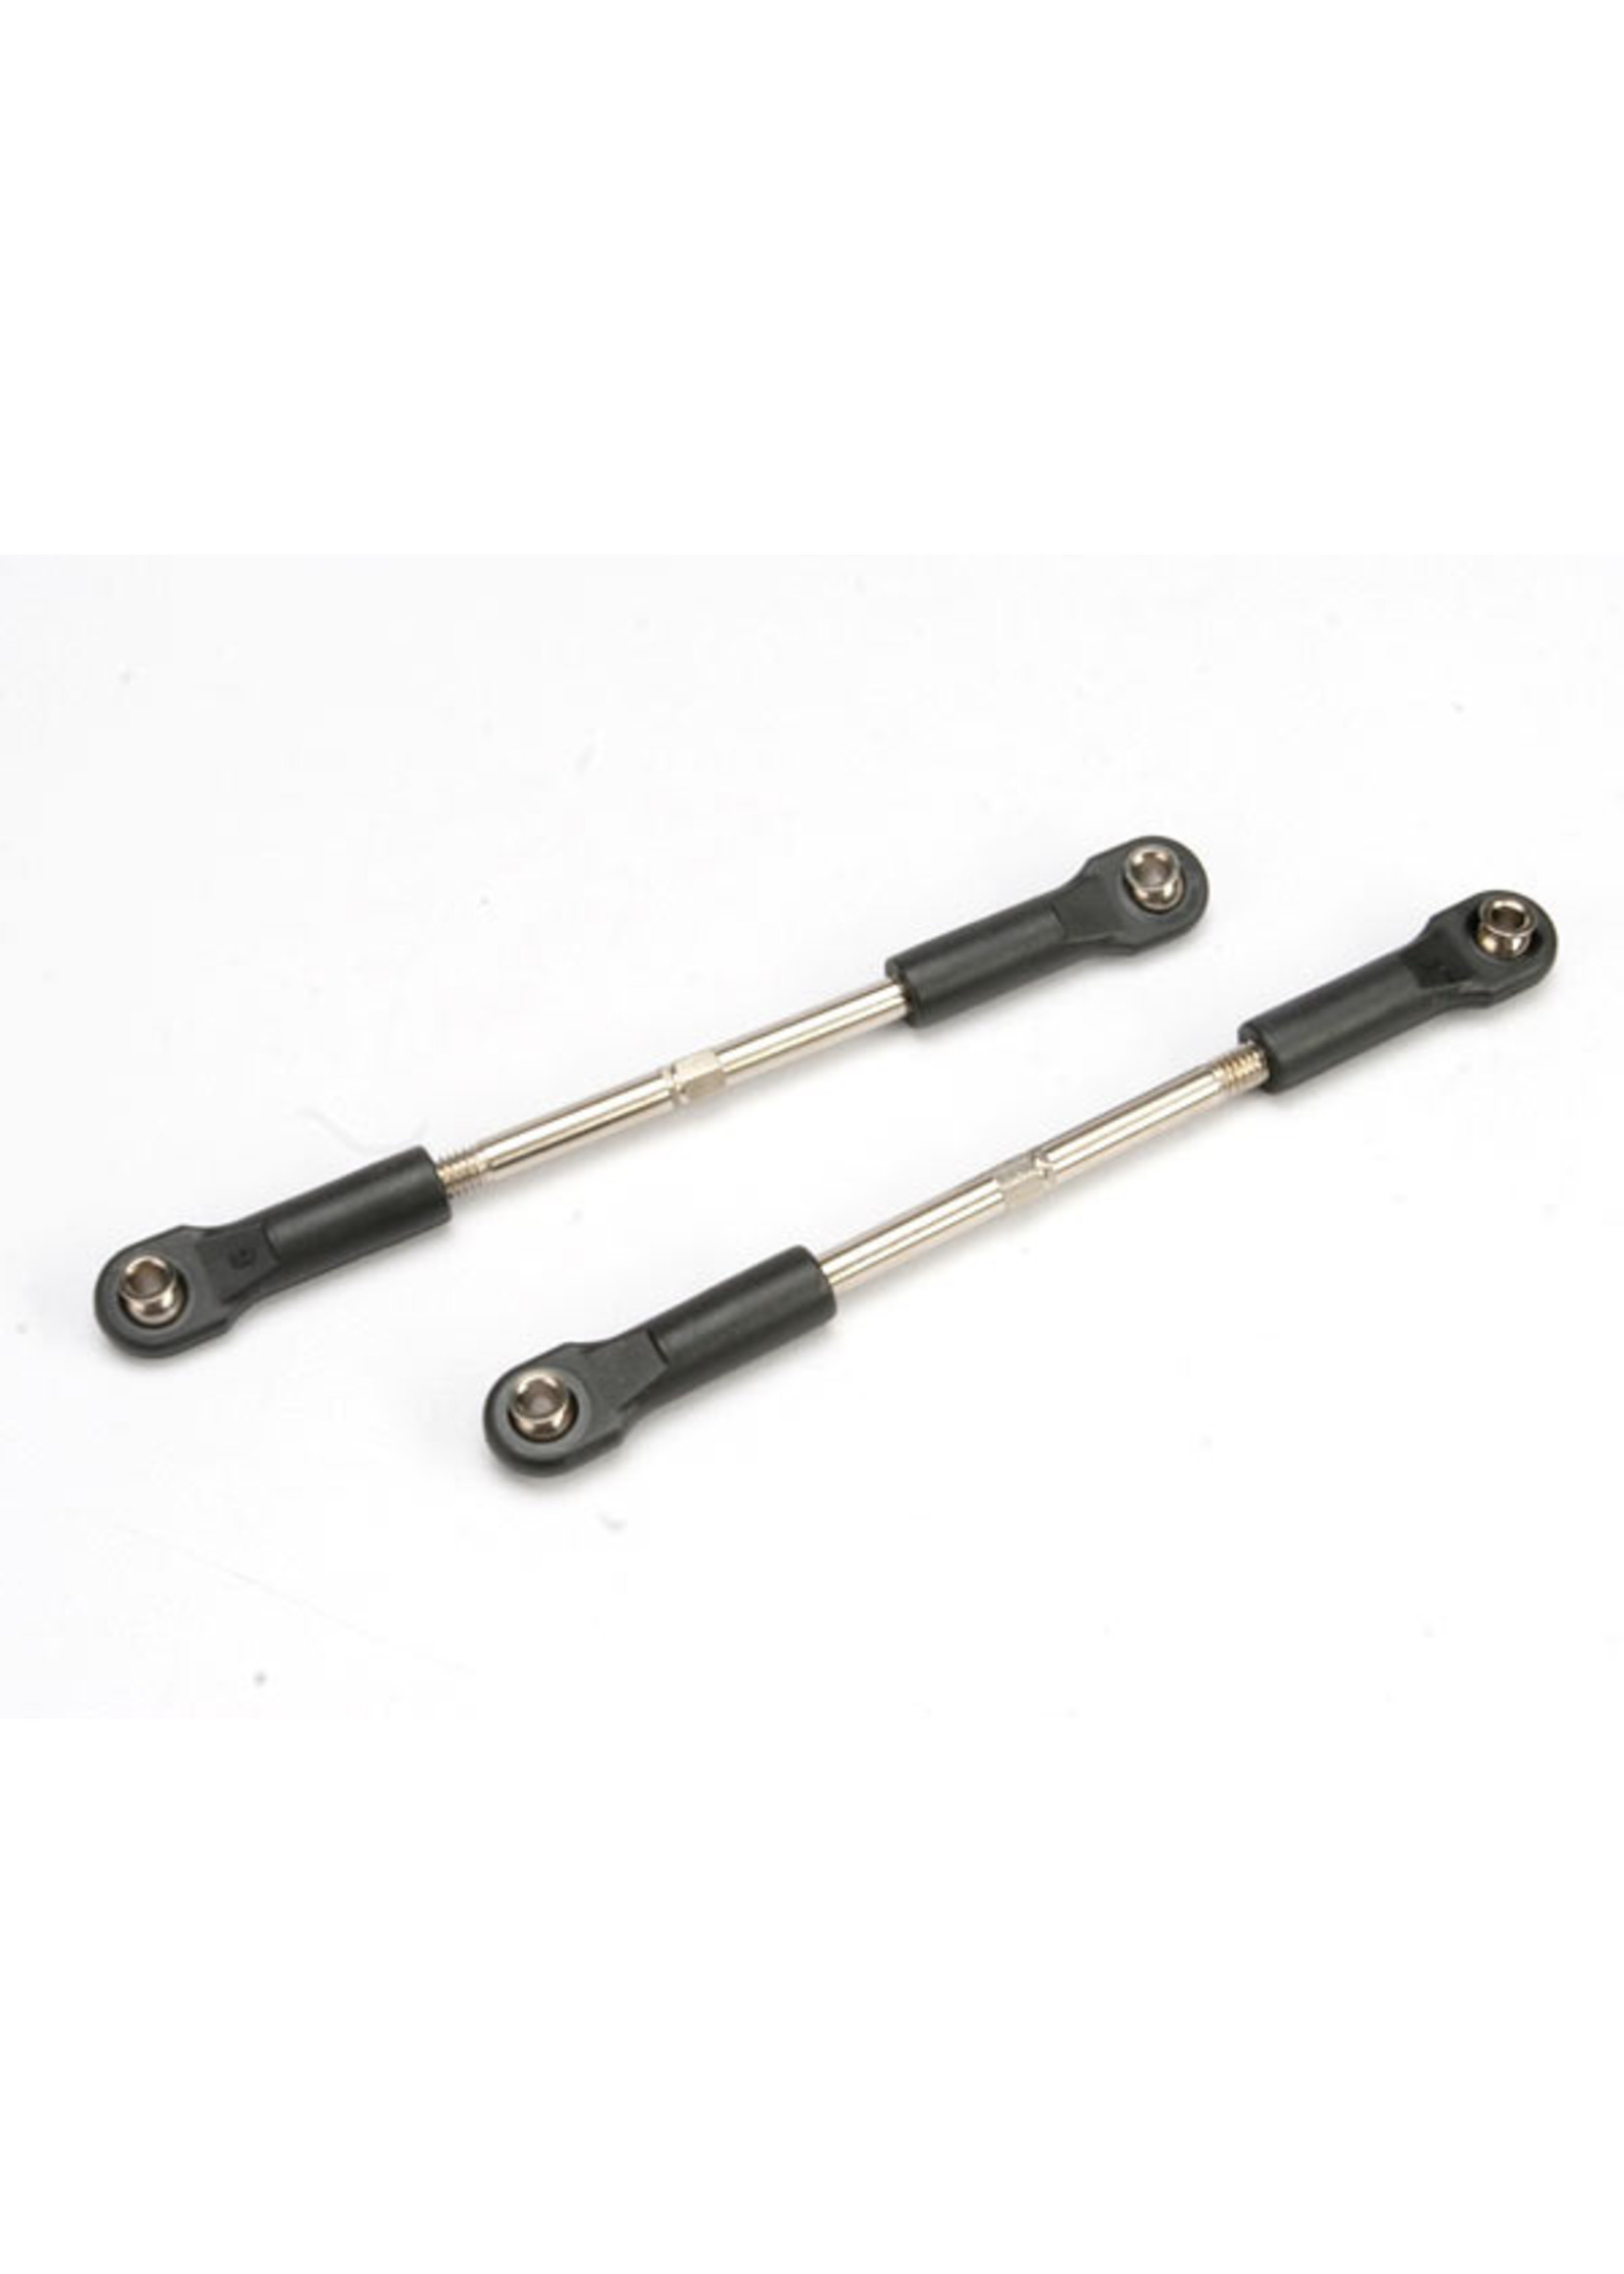 Traxxas 5538 - Front Turnbuckles 61mm for Jato